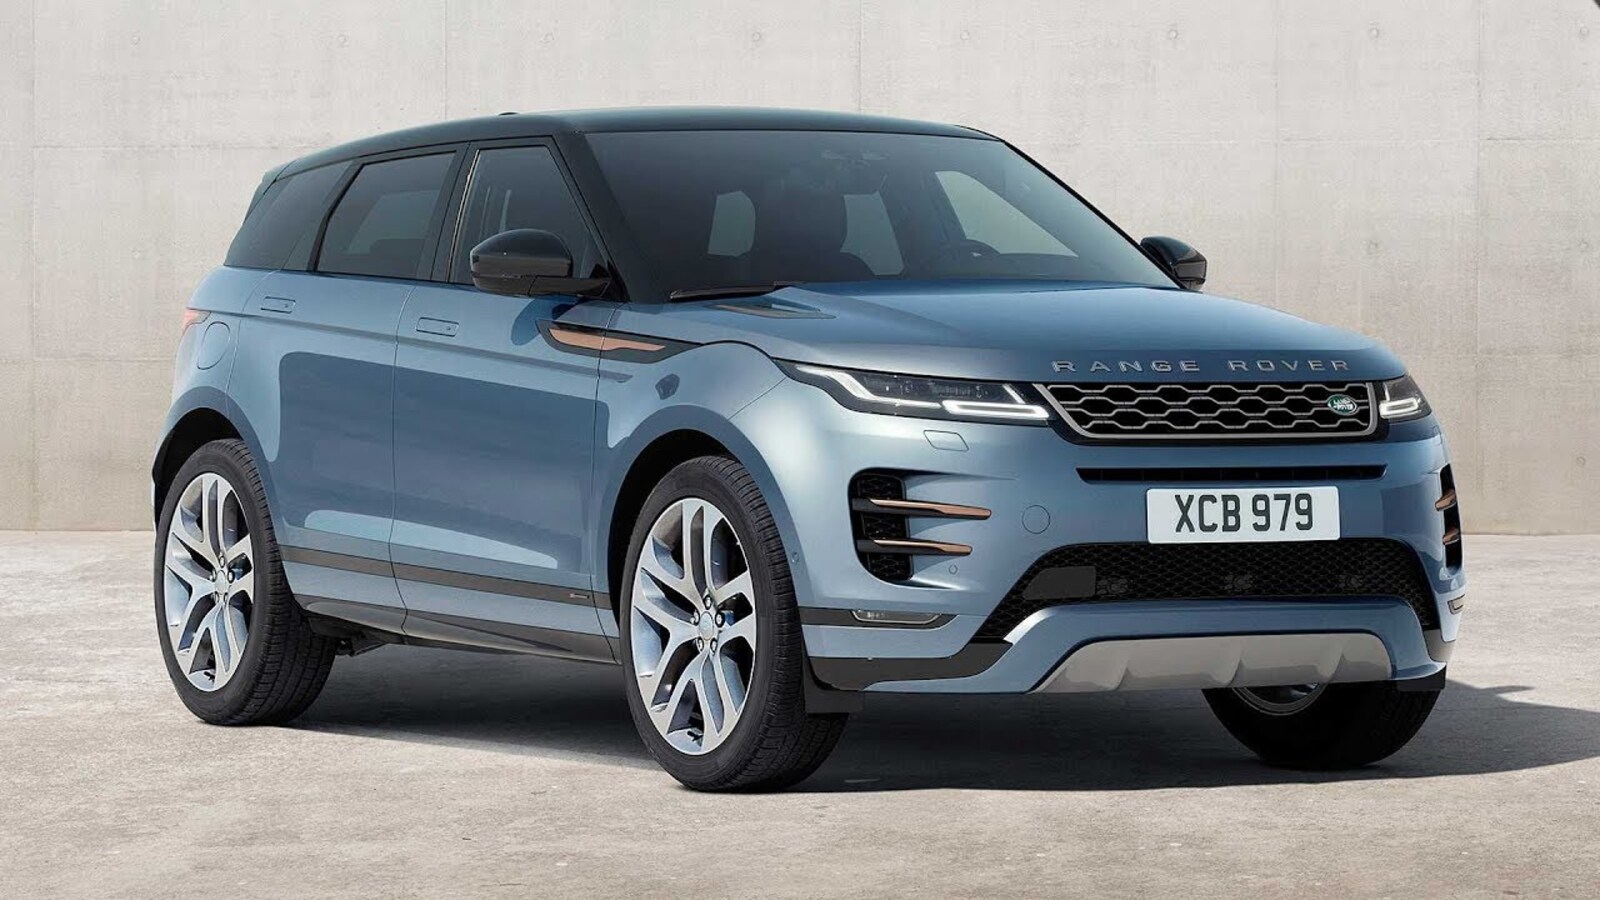 Land Rover unveils new Range Rover Evoque: All you need to know